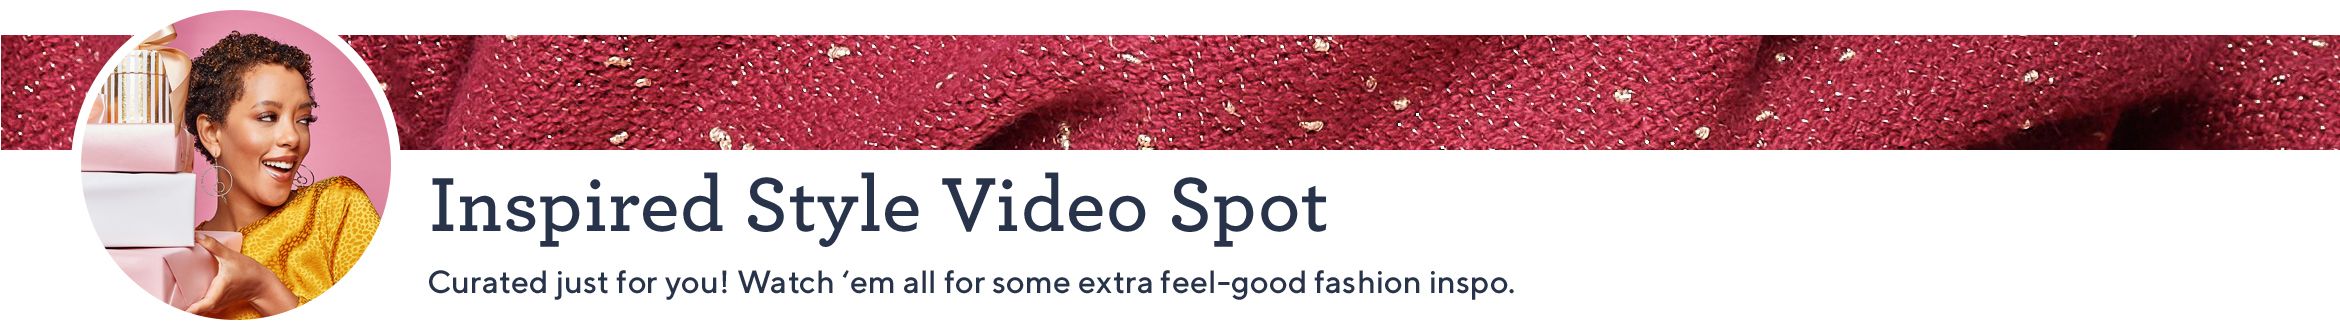 Inspired Style Video Spot. Curated just for you! Watch 'em all for some extra feel-good fashion inspo.